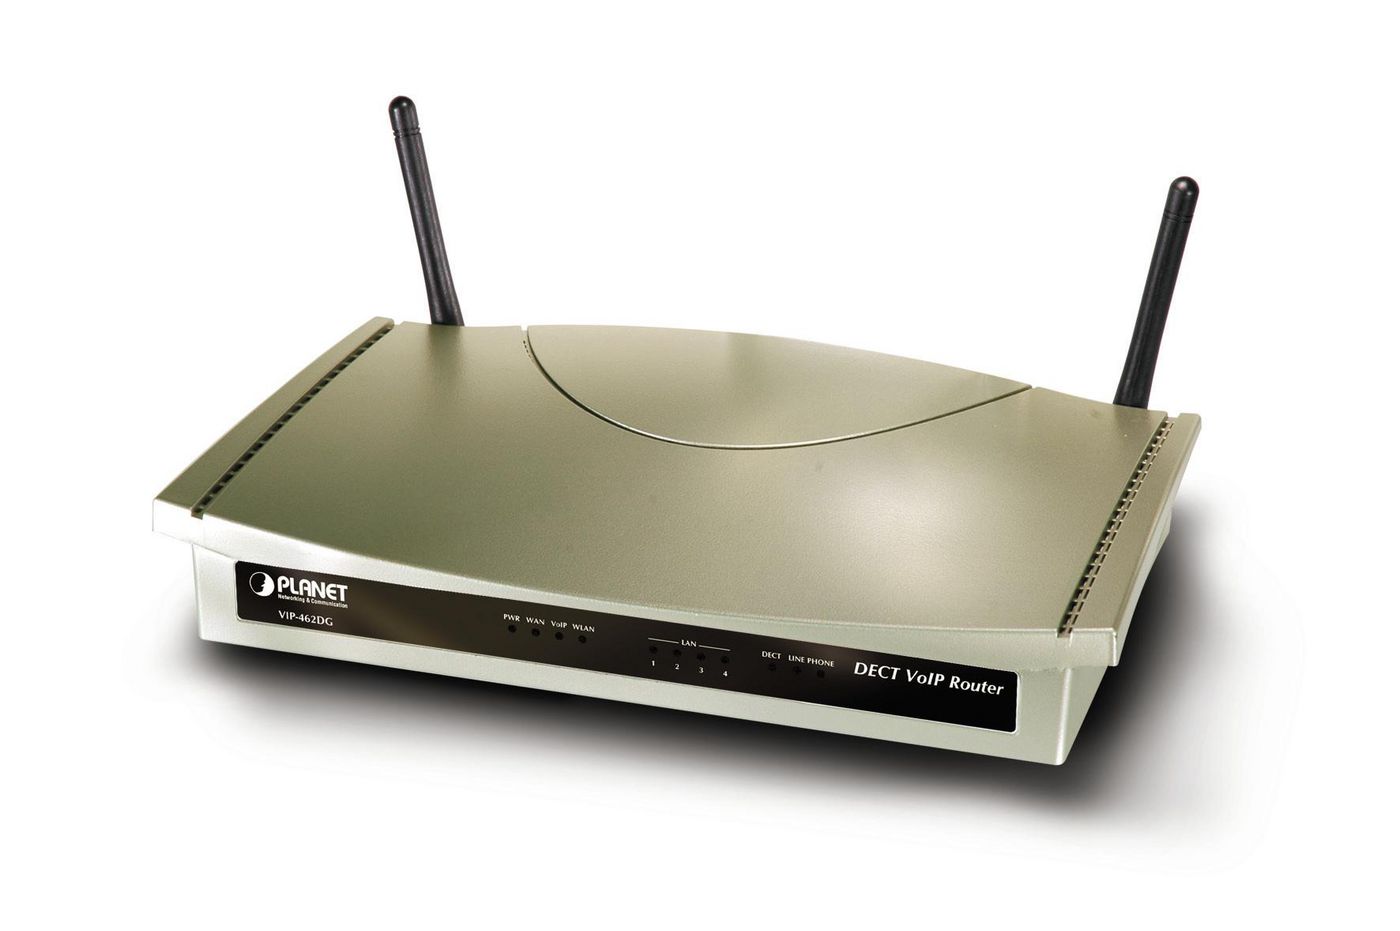 802.11g WiFi DECT/VoIP Router